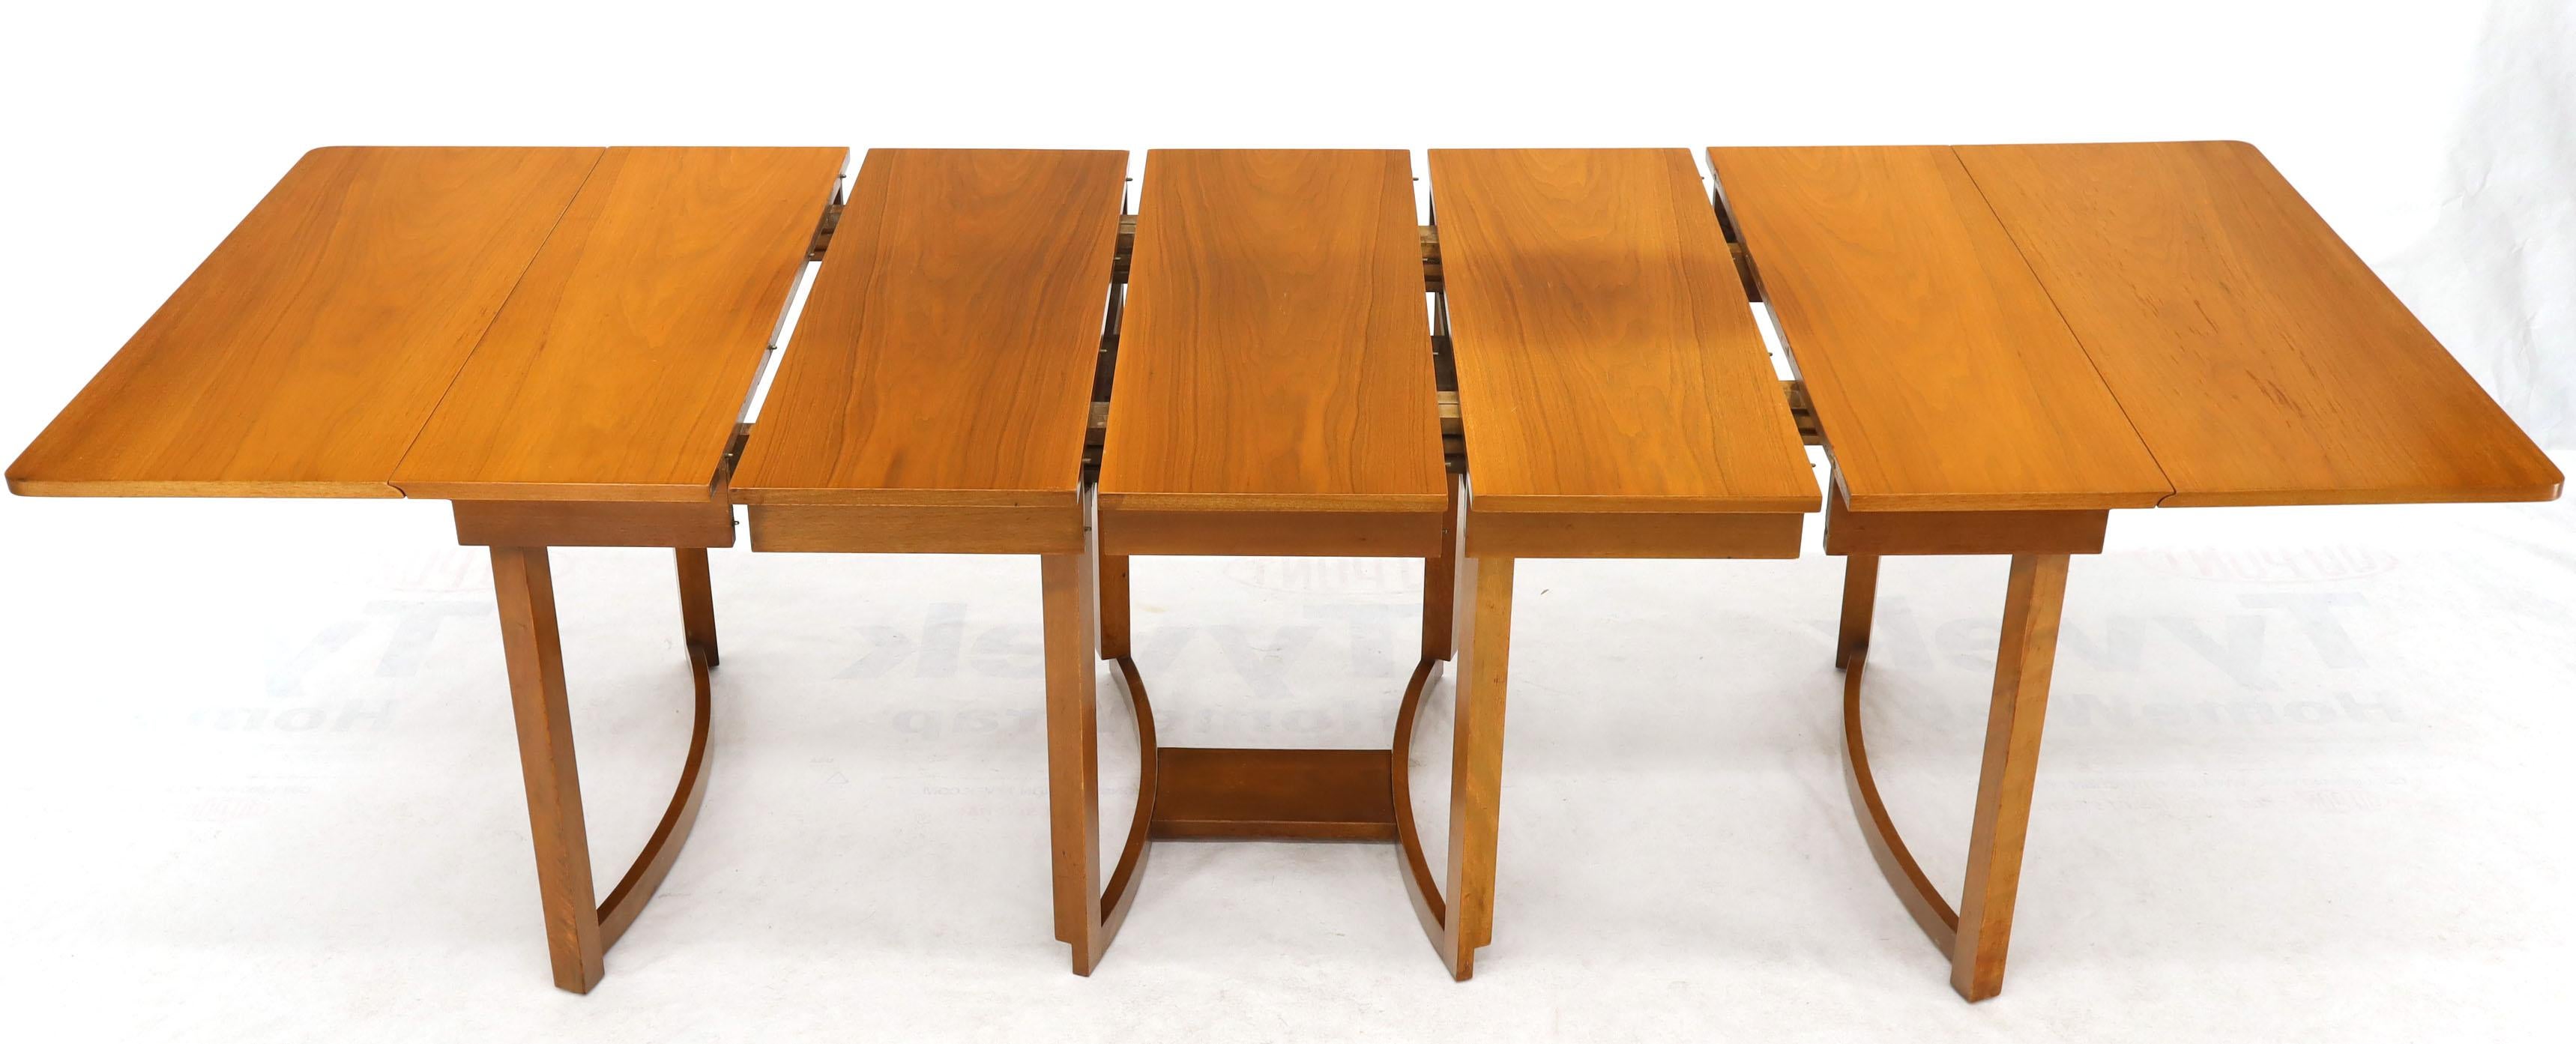 Midcentury Light Walnut Drop Leaf Expandable Dining Table, Three Leafs Boards im Angebot 6